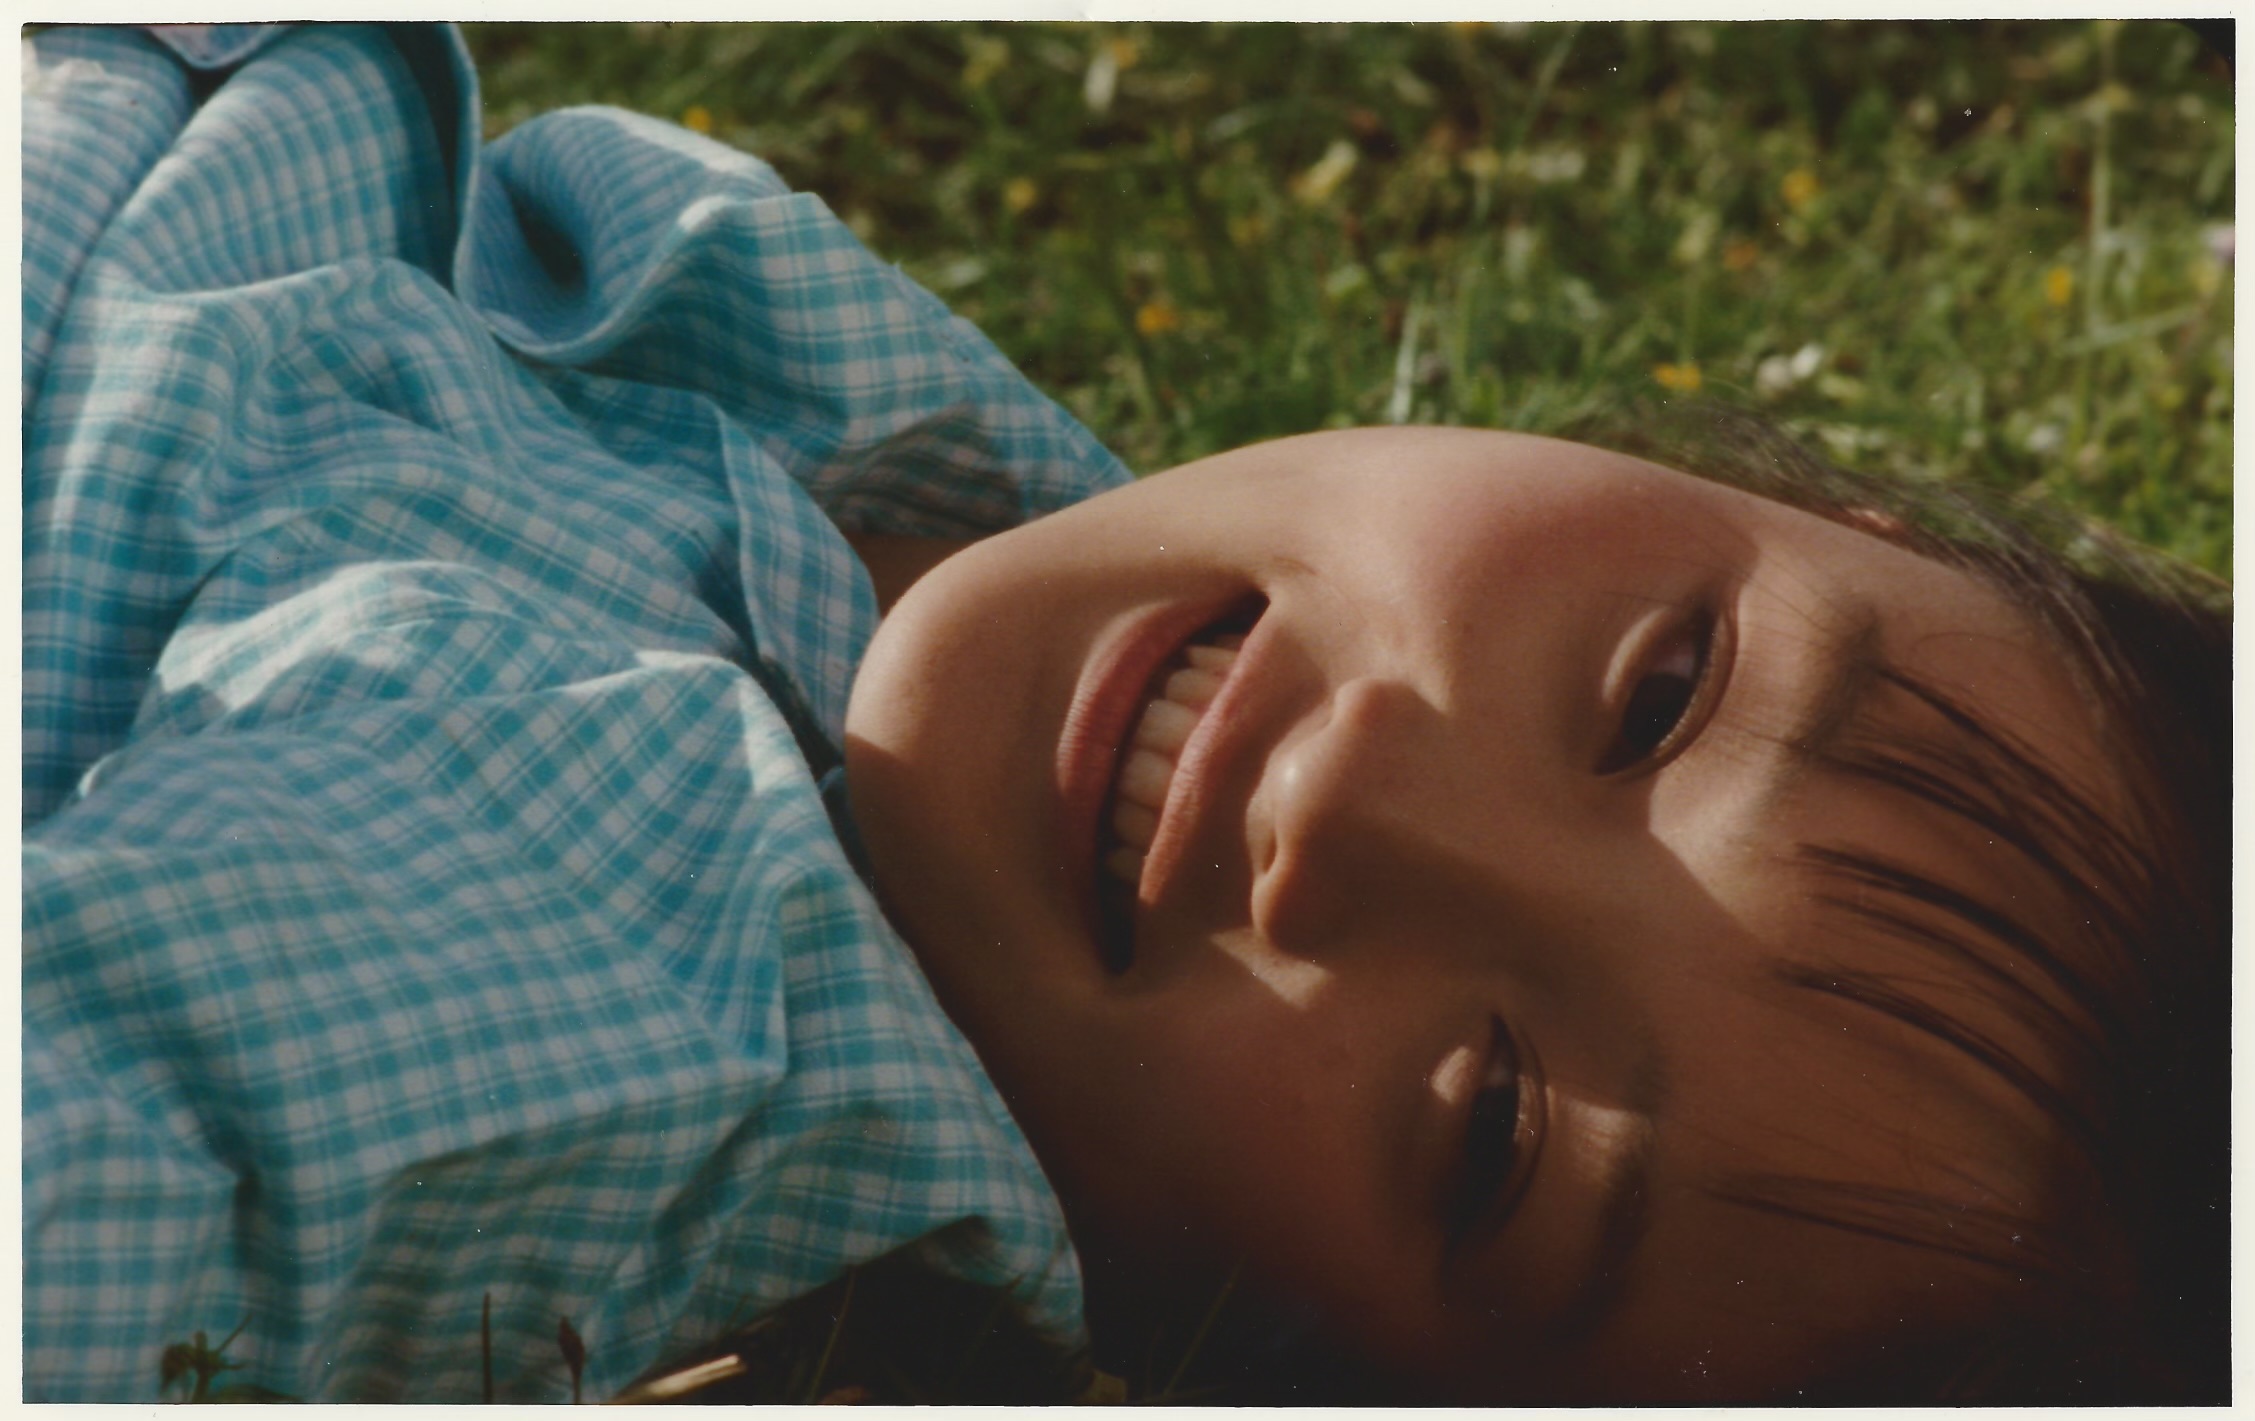 Young person smiles while laying on grass